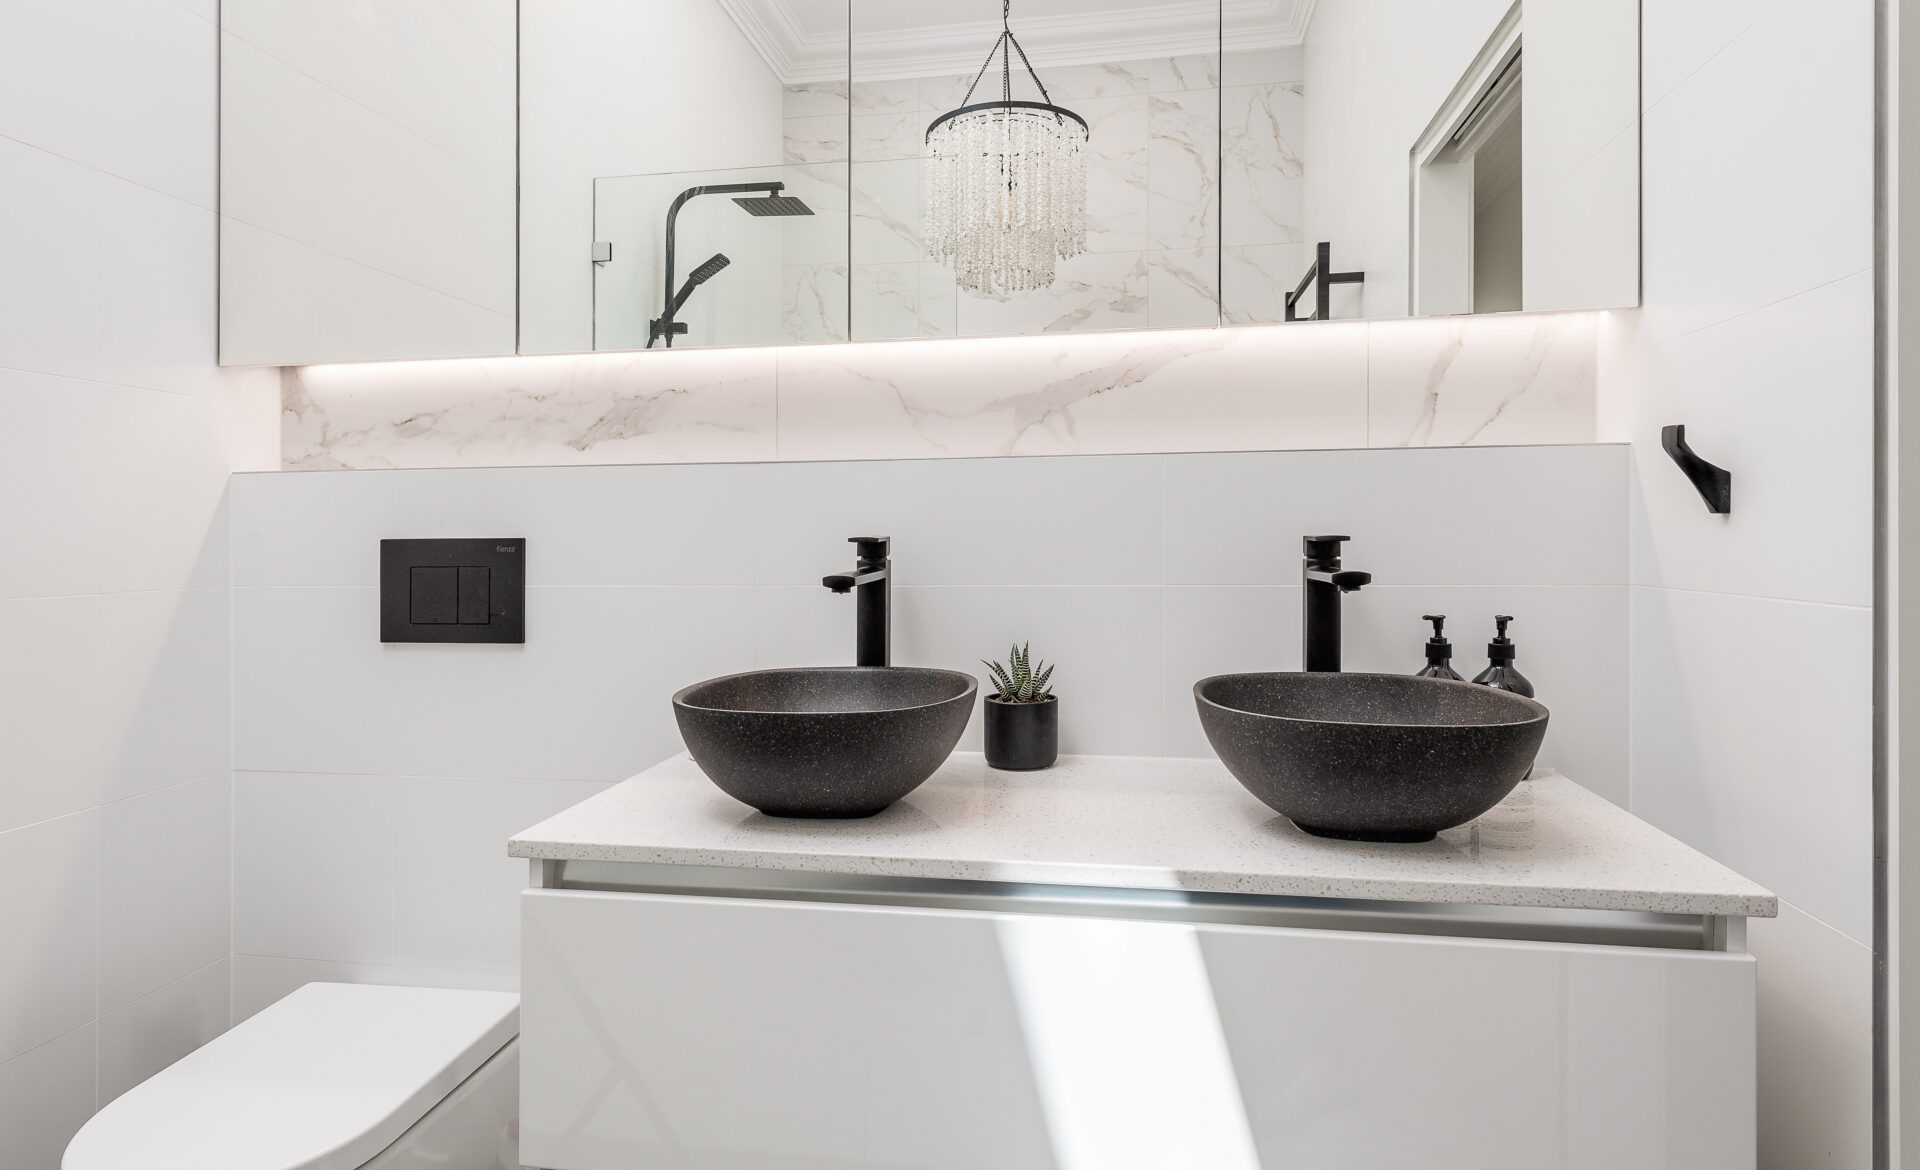 Bathroom remodel Project - Woodward St, Coogee